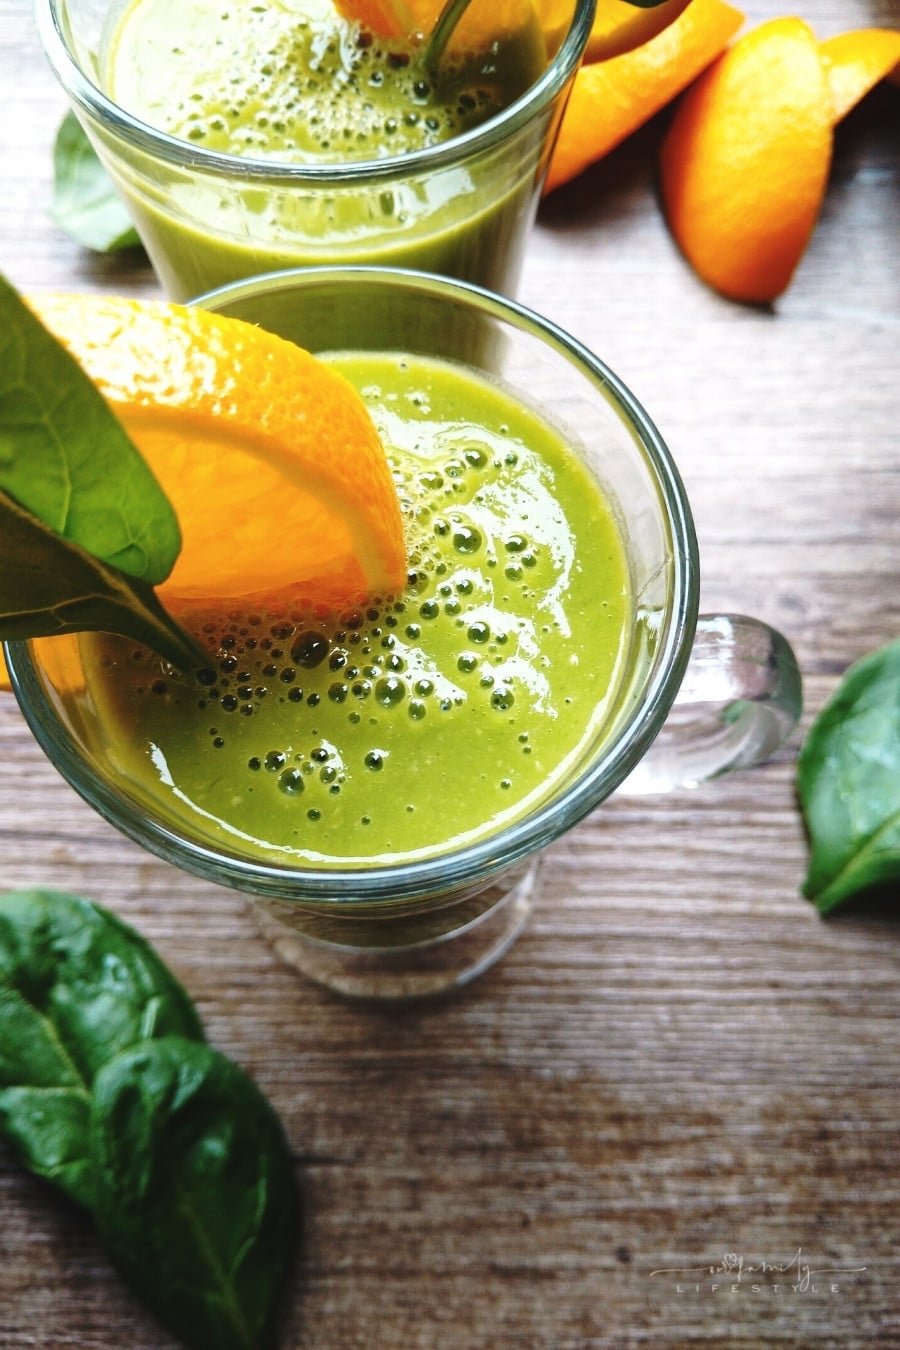 green smoothie with spinach, orange, and mango around the glass